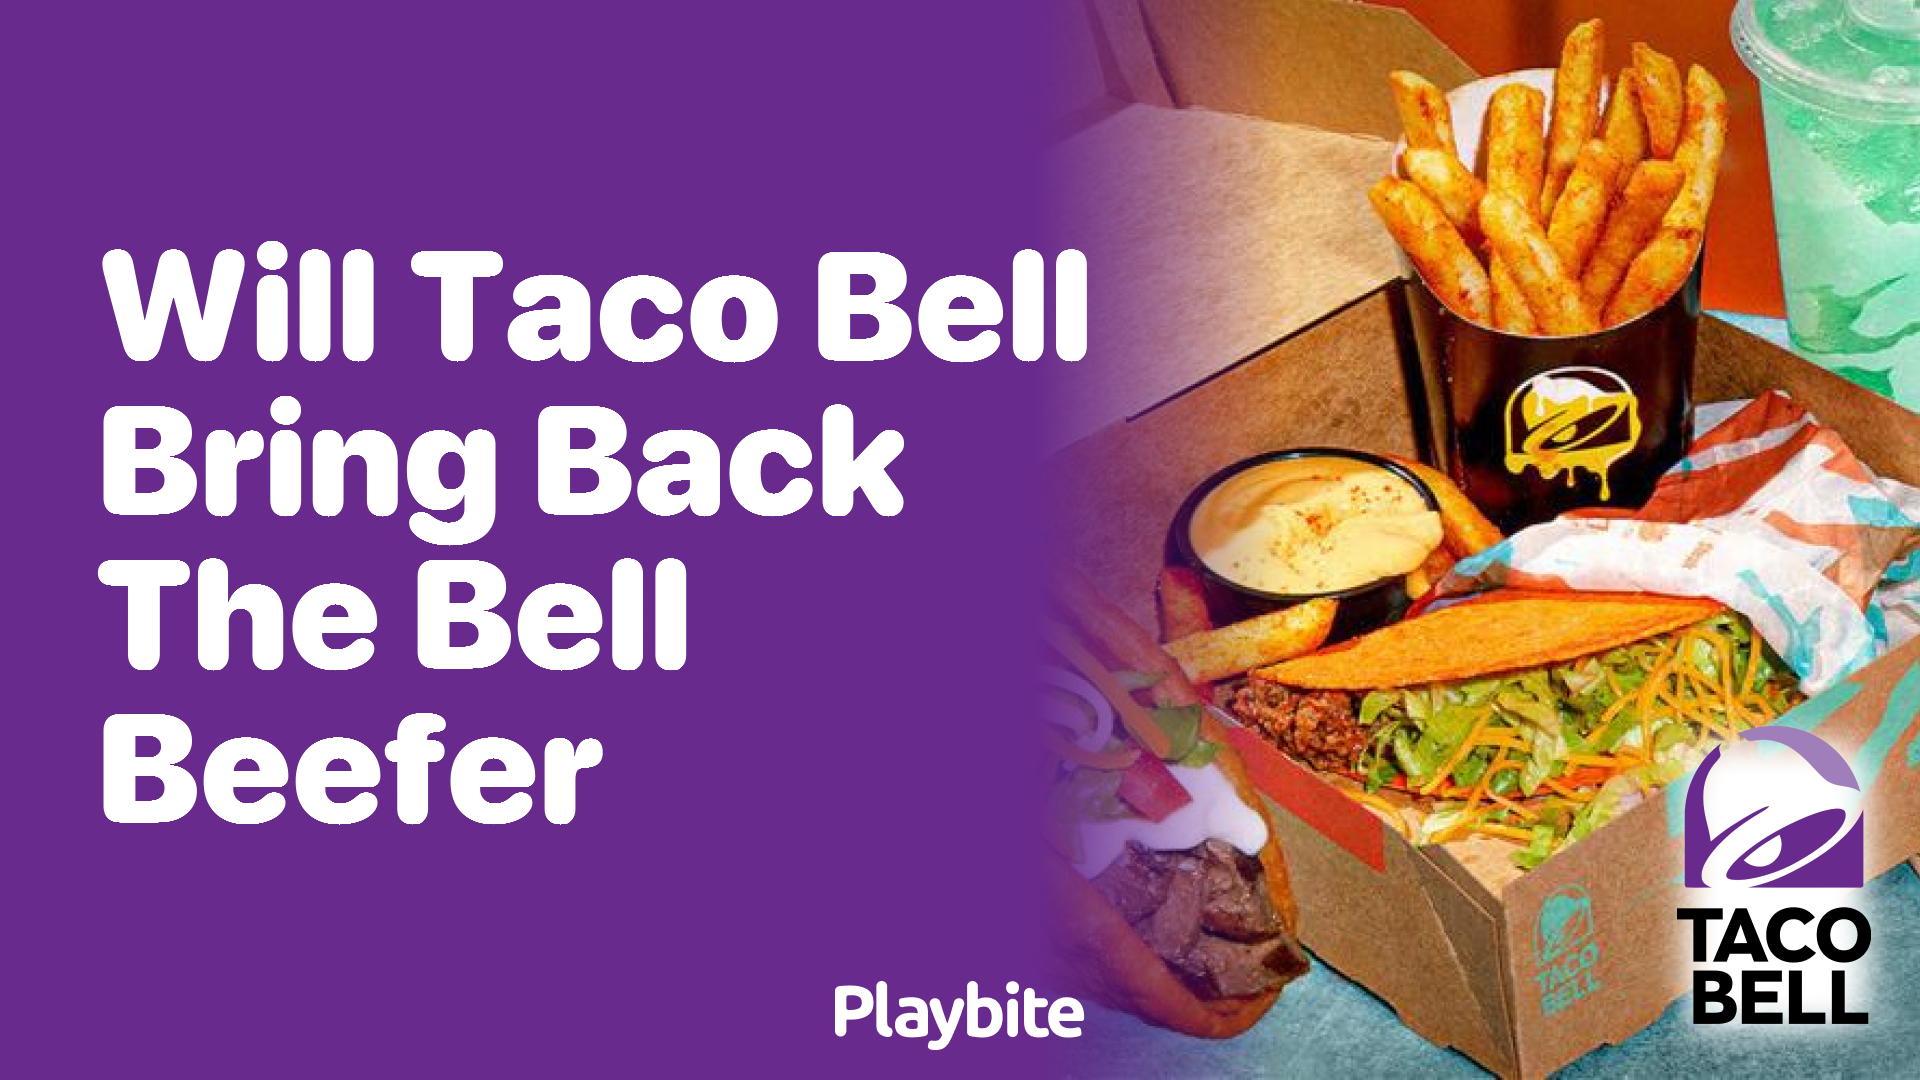 Will Taco Bell Bring Back the Bell Beefer?